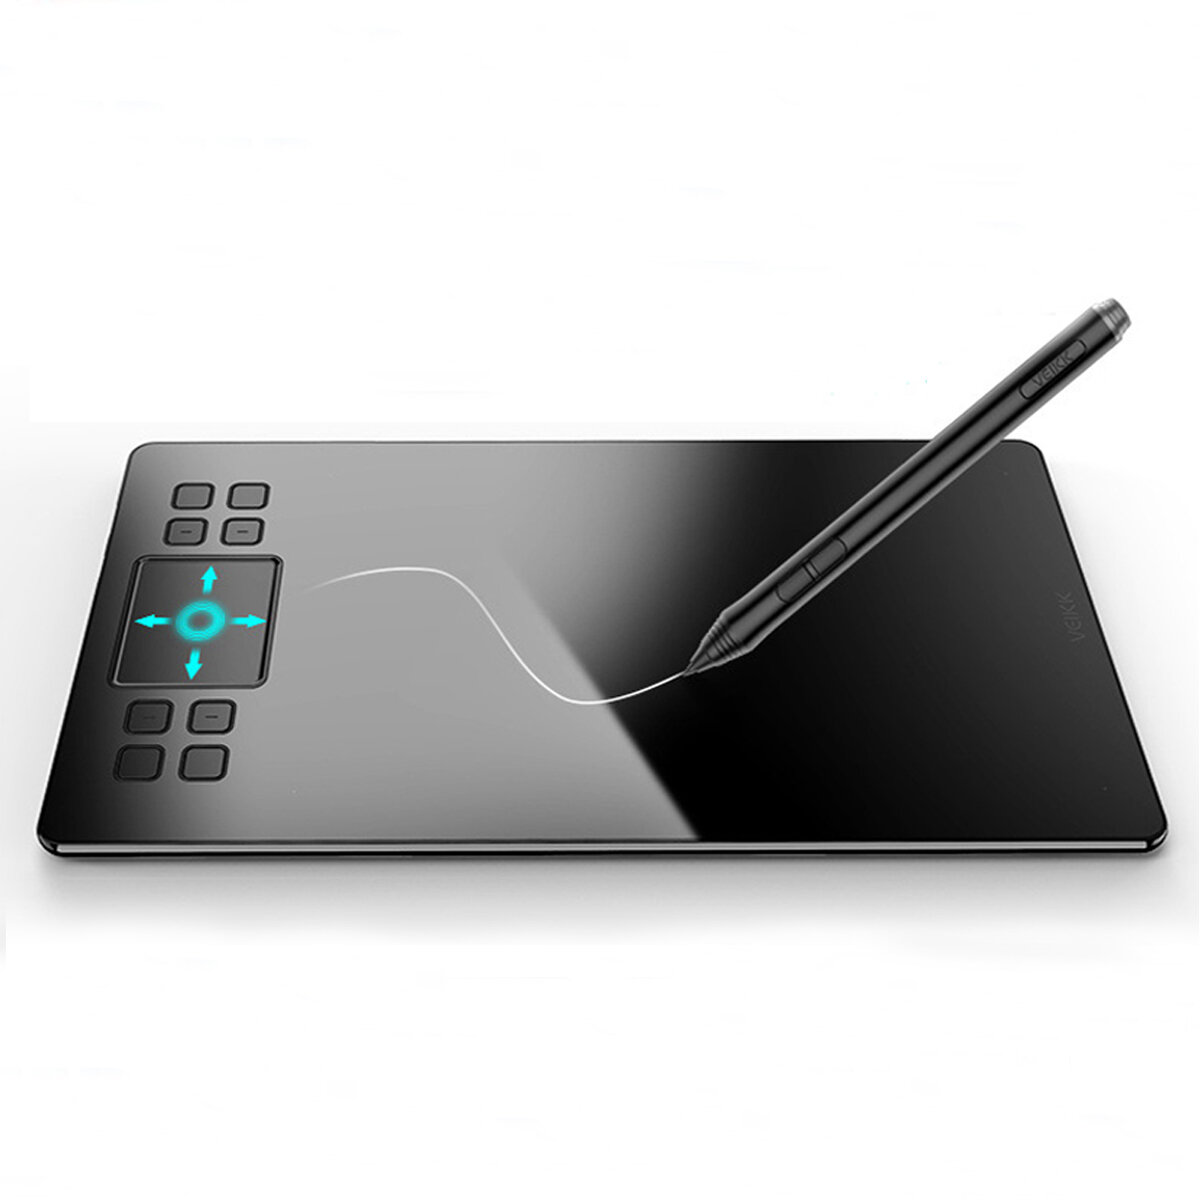 veikk a50 graphics drawing tablet digital pen tablet with 8192 levels